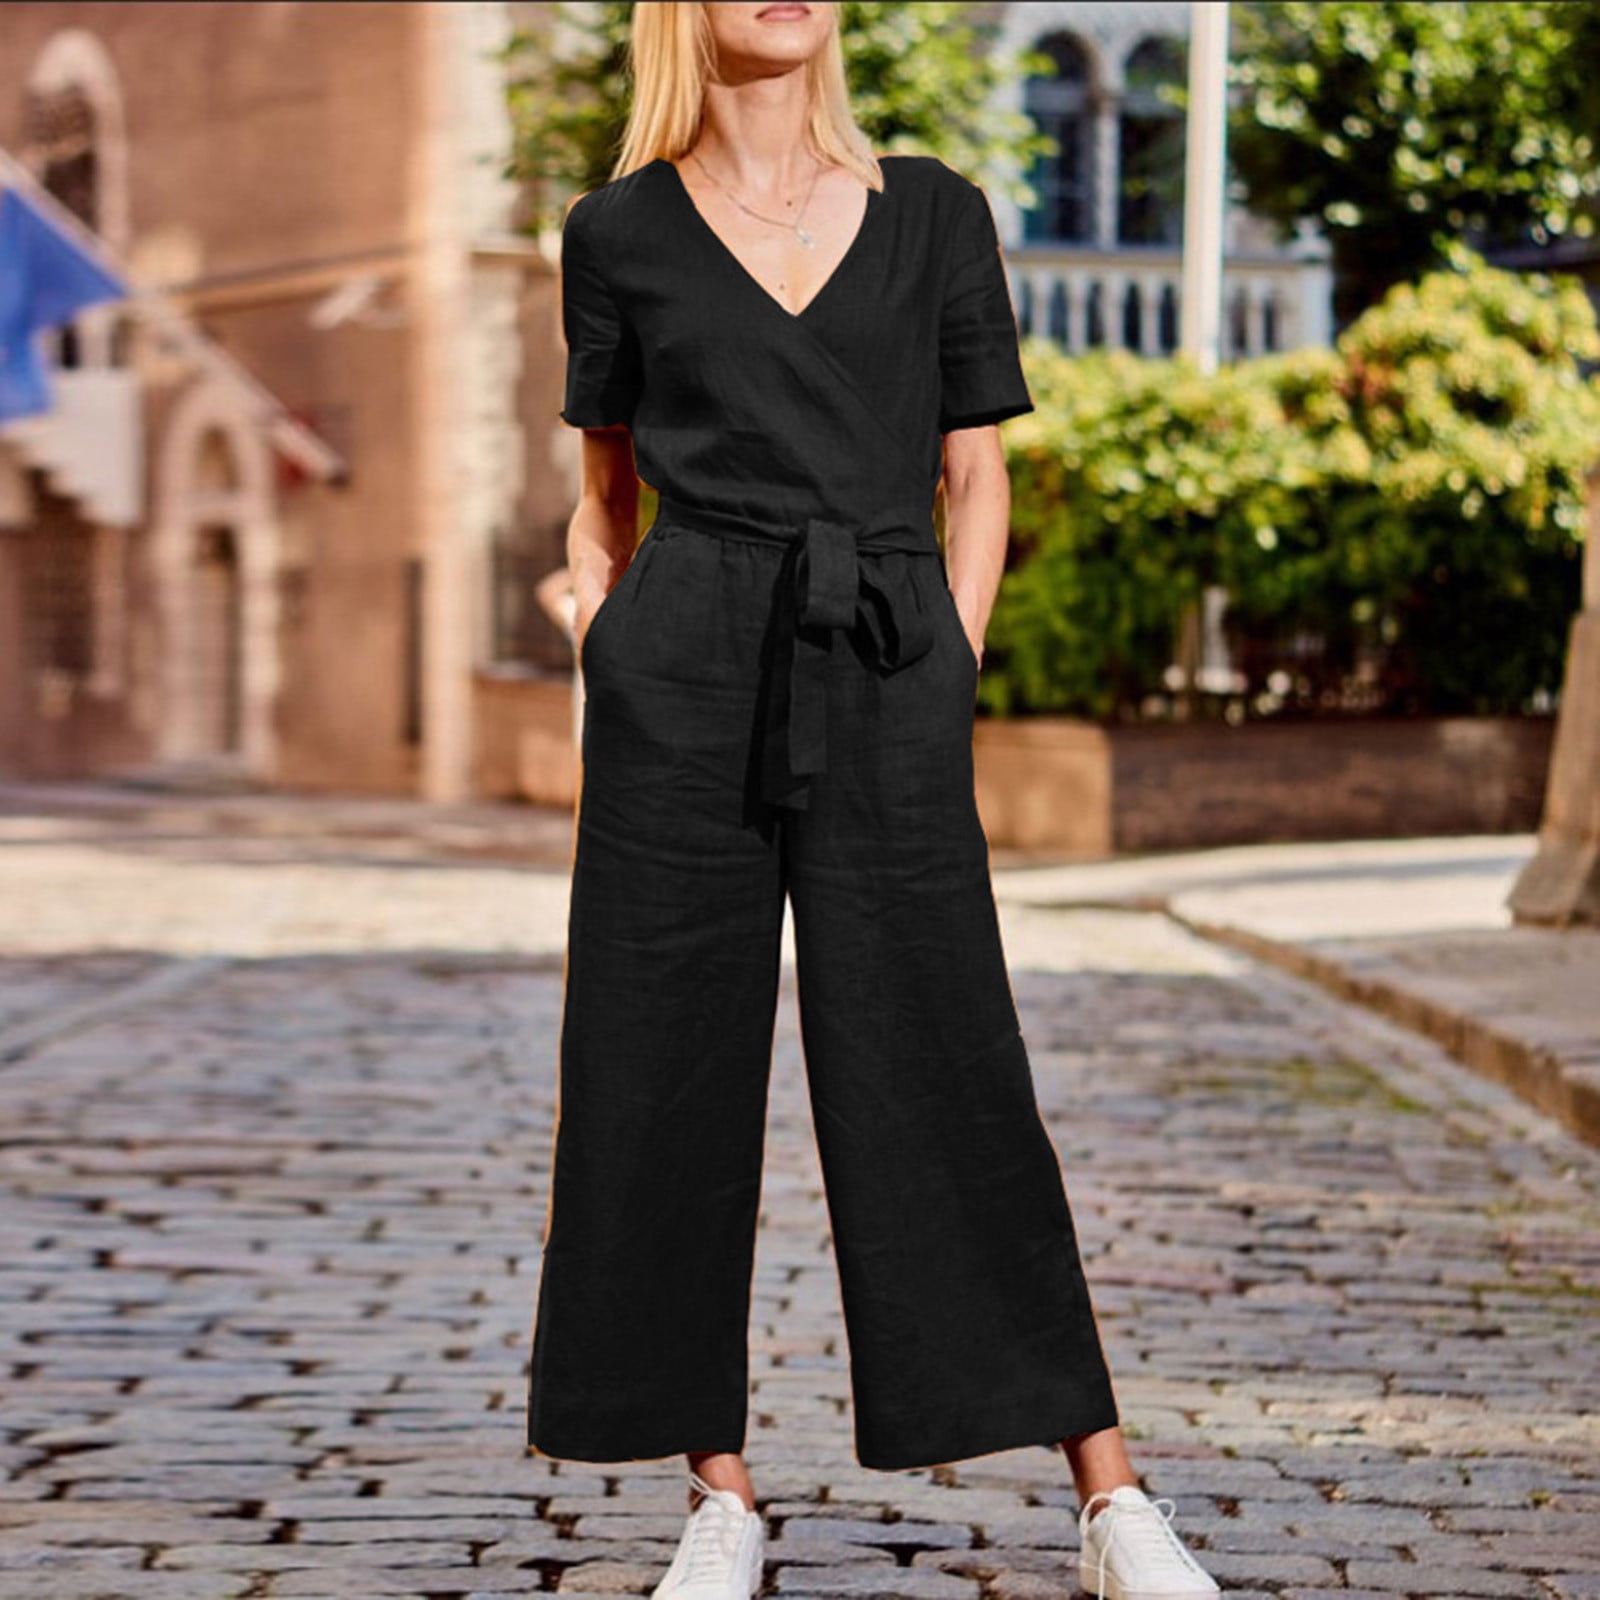 17 Easy, Stylish Jumpsuits You Can Wear to Work